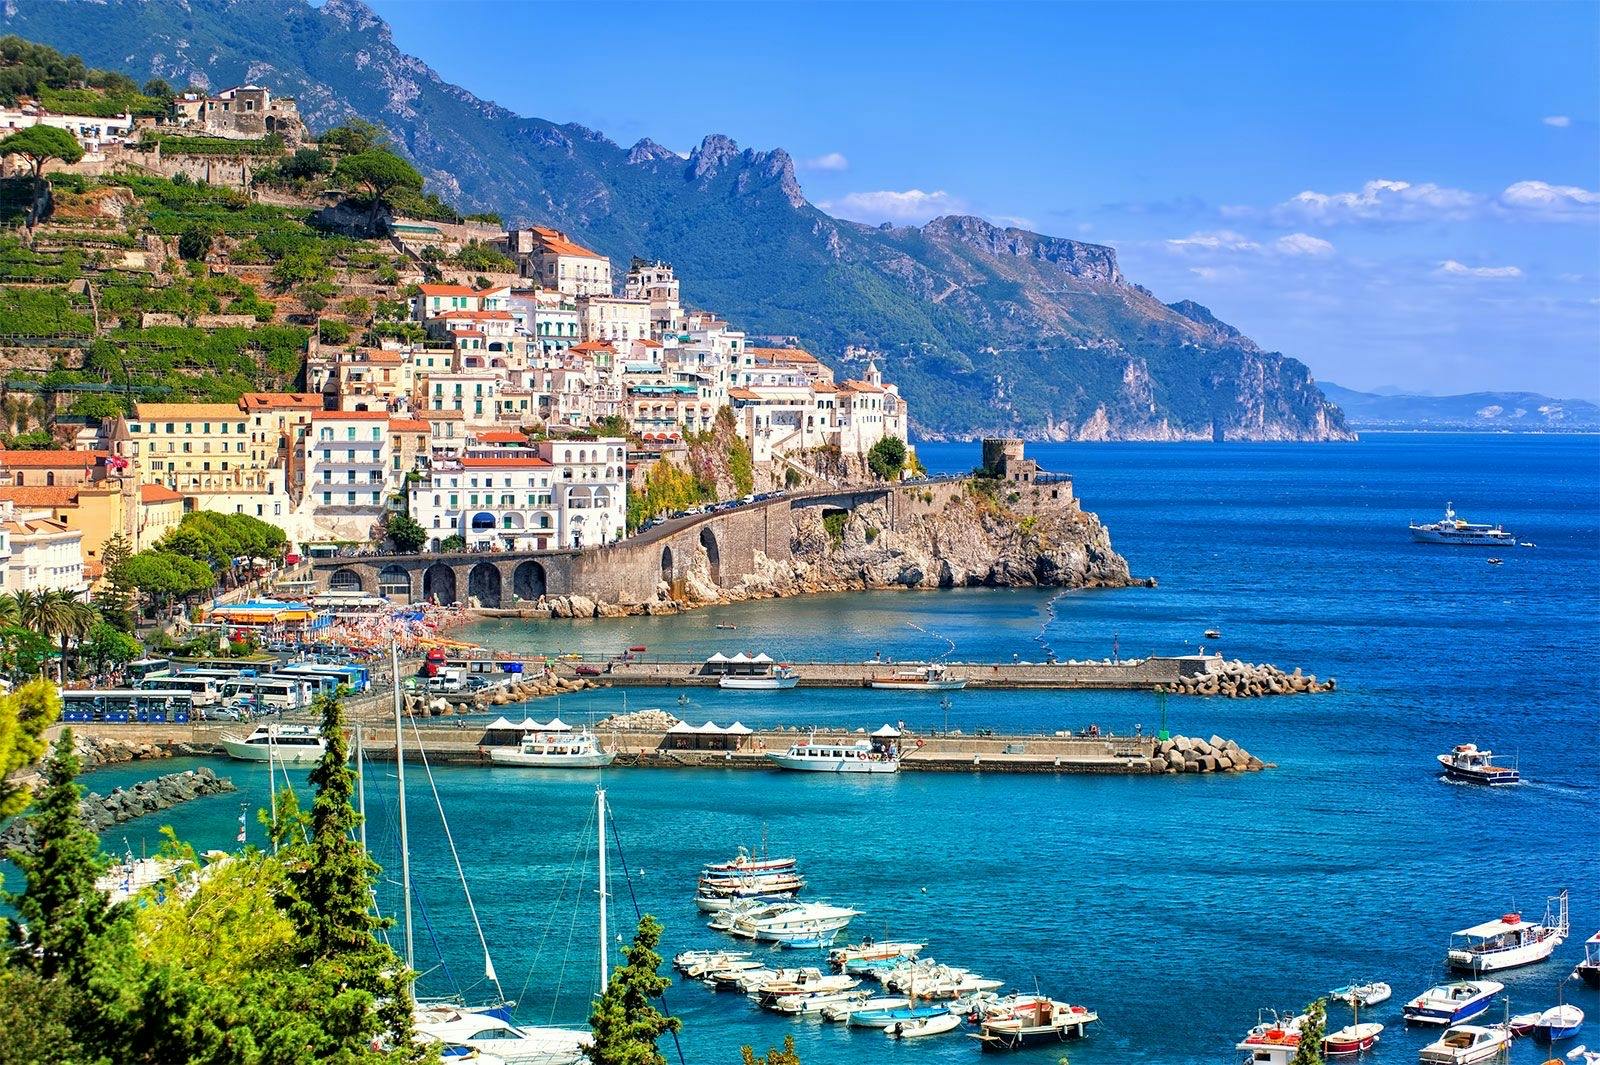 8 days in Italy from Venice to the Amalfi Coast